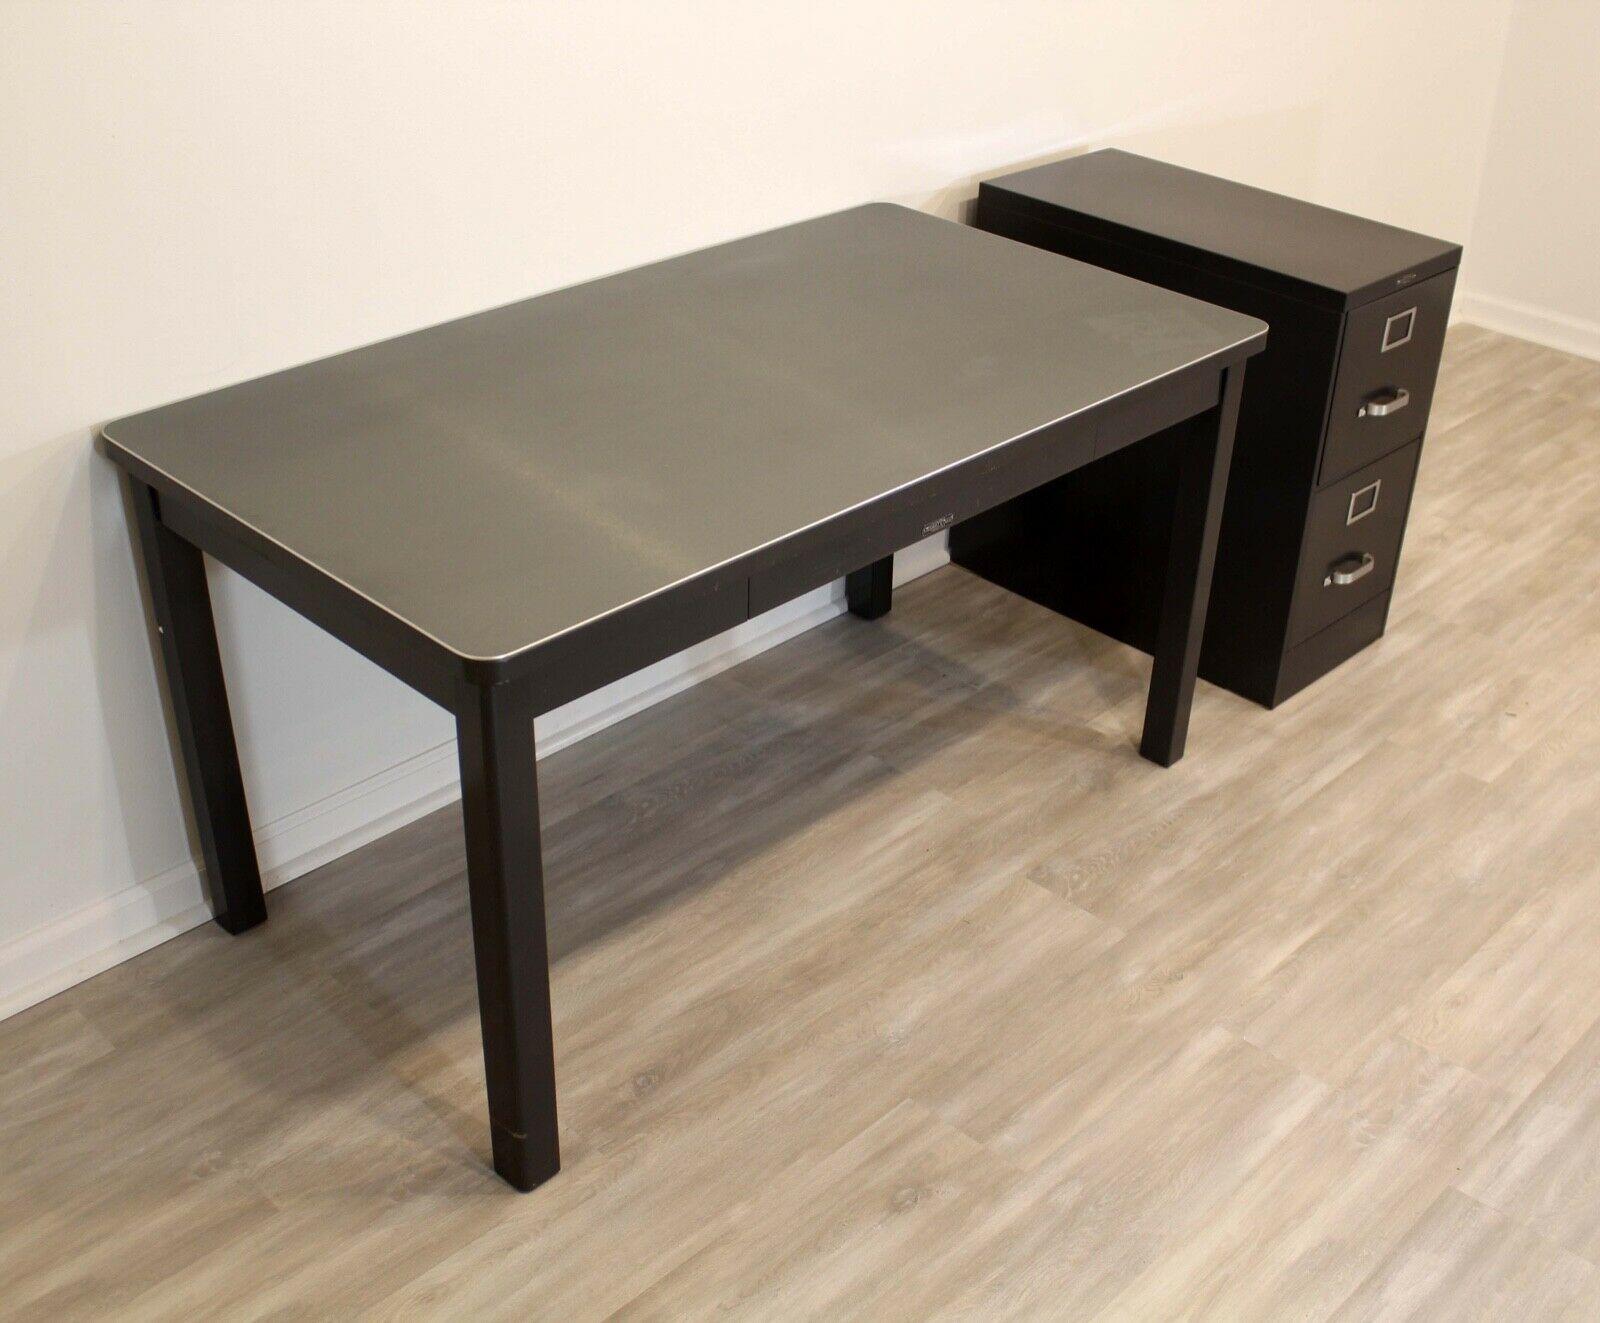 This Mid-Century Modern style desk and matching file cabinet was manufactured by the American company, McDowell & Craig. Built to last, this steel-welded frame and is finished with their pewter finish contrasted with a brushed stainless steel top.